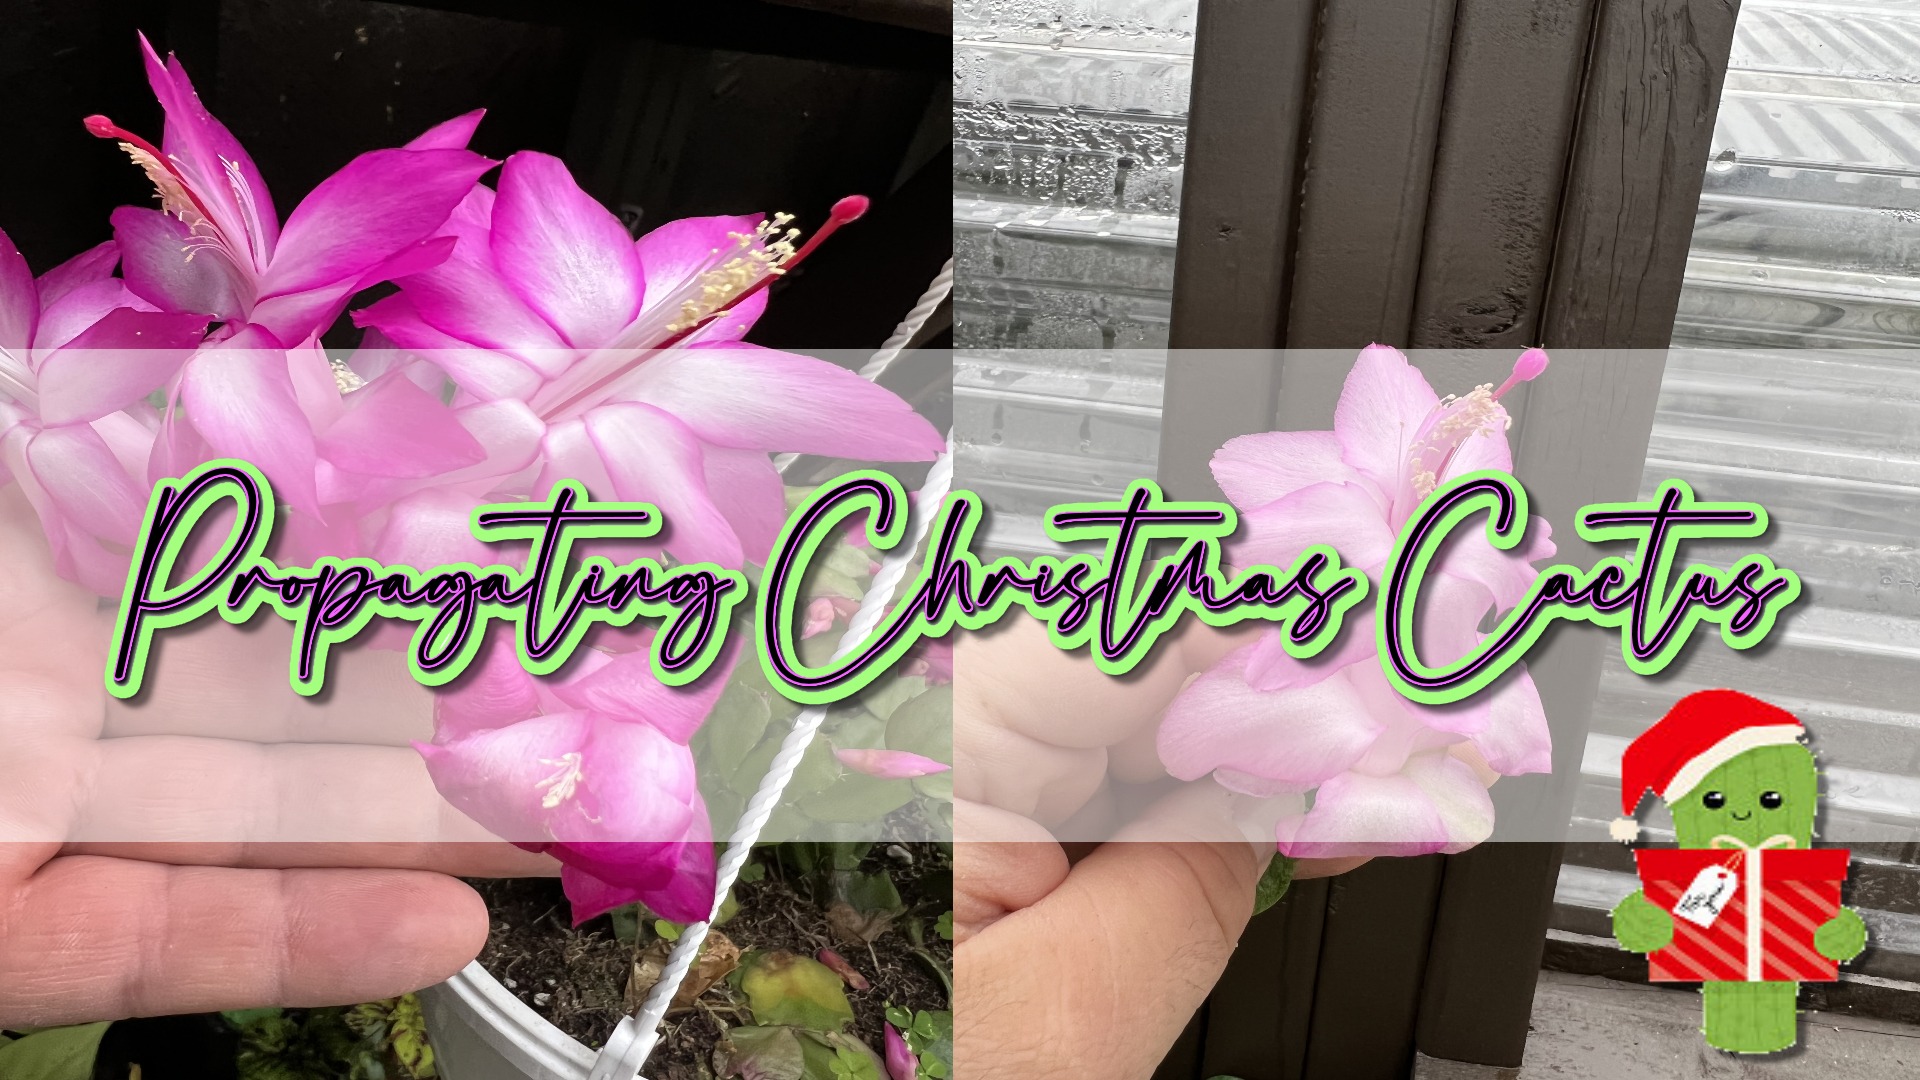 Propagating Christmas Cactus By Cuttings